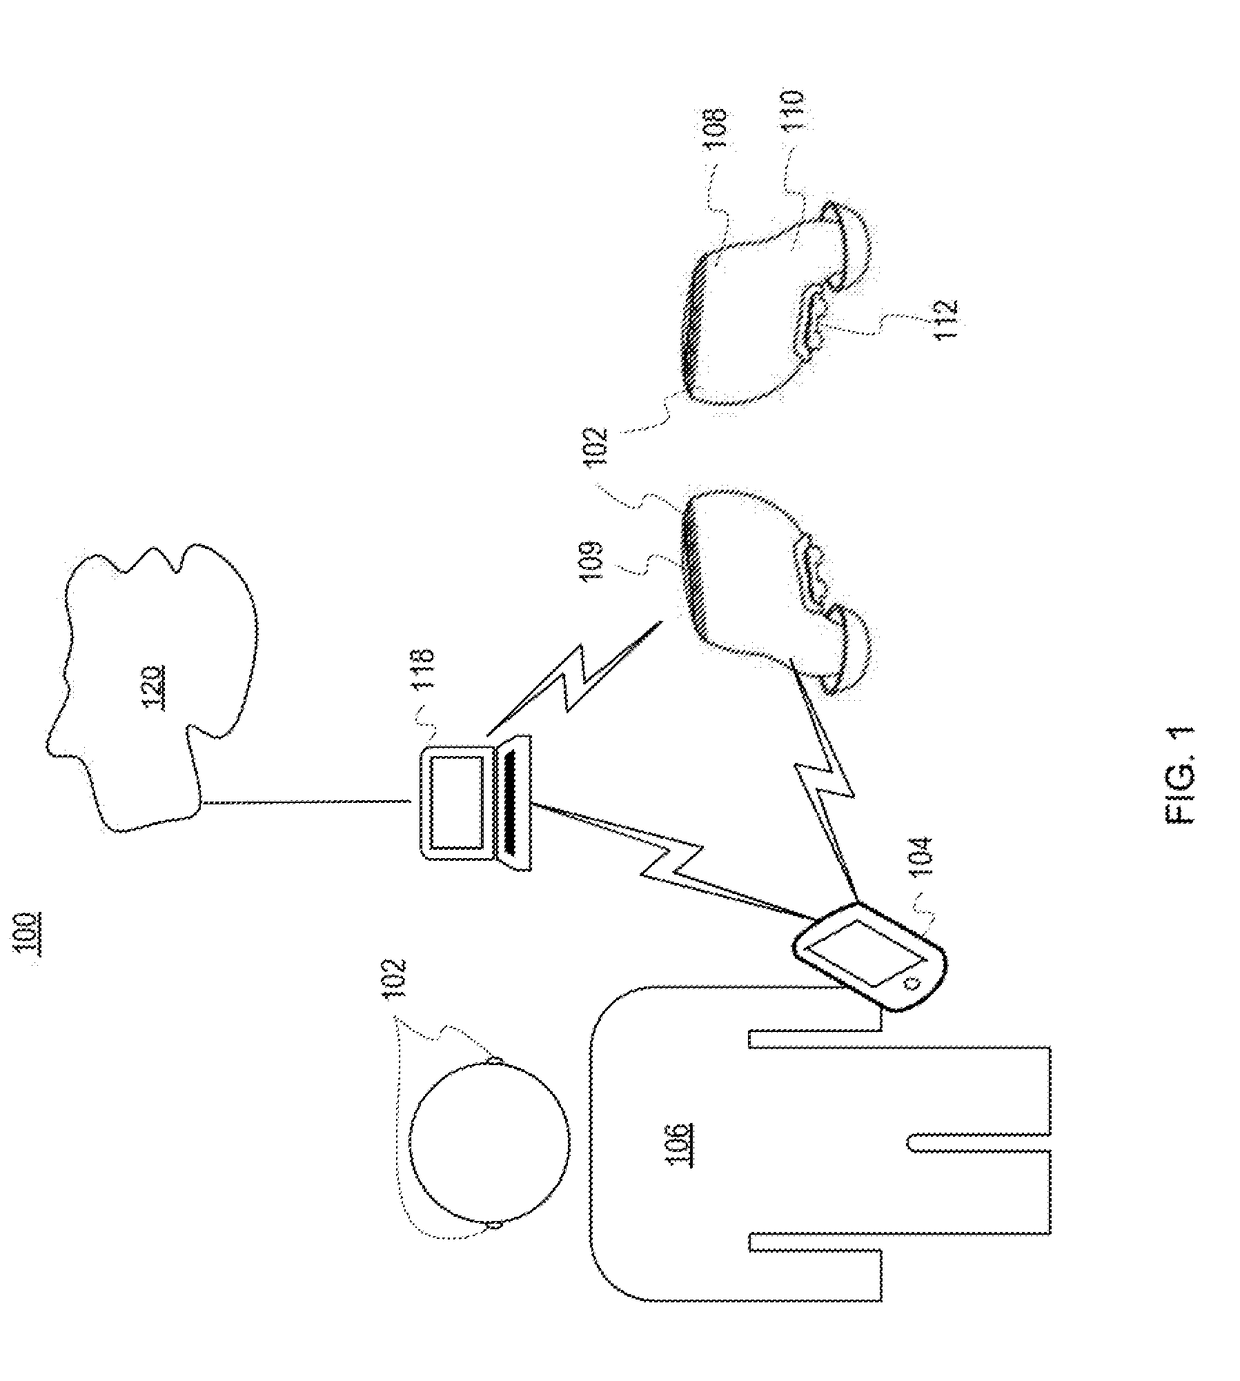 Wireless Earpiece with a Passive Virtual Assistant